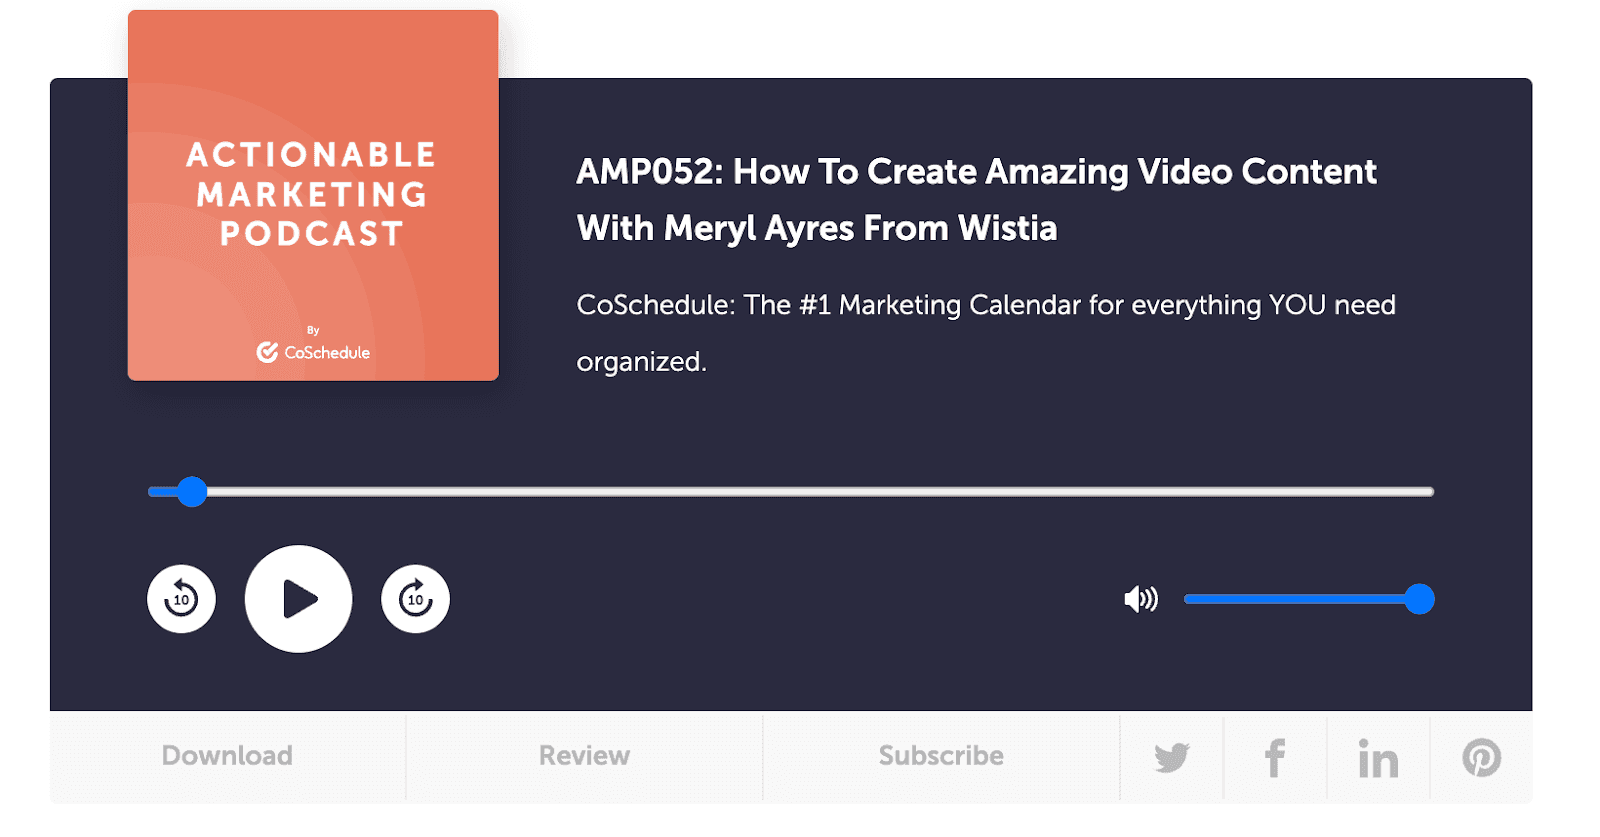 AMP052: How to create amazing video content with Meryl Ayres from Wistia